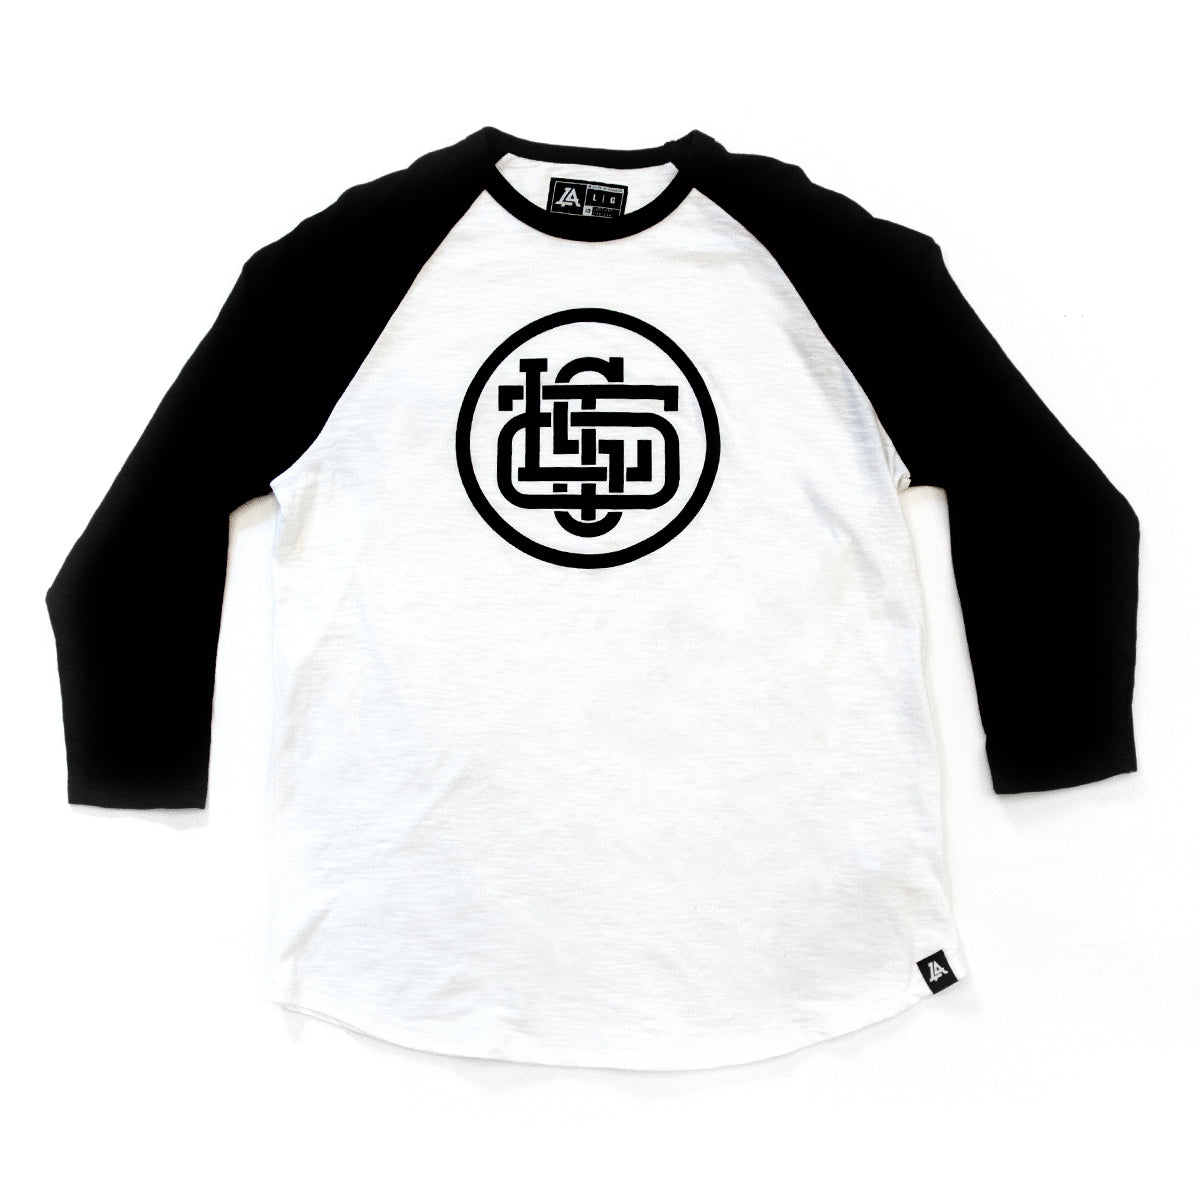 Lost Art Canada - black and white LOST monogram baseball tee front view